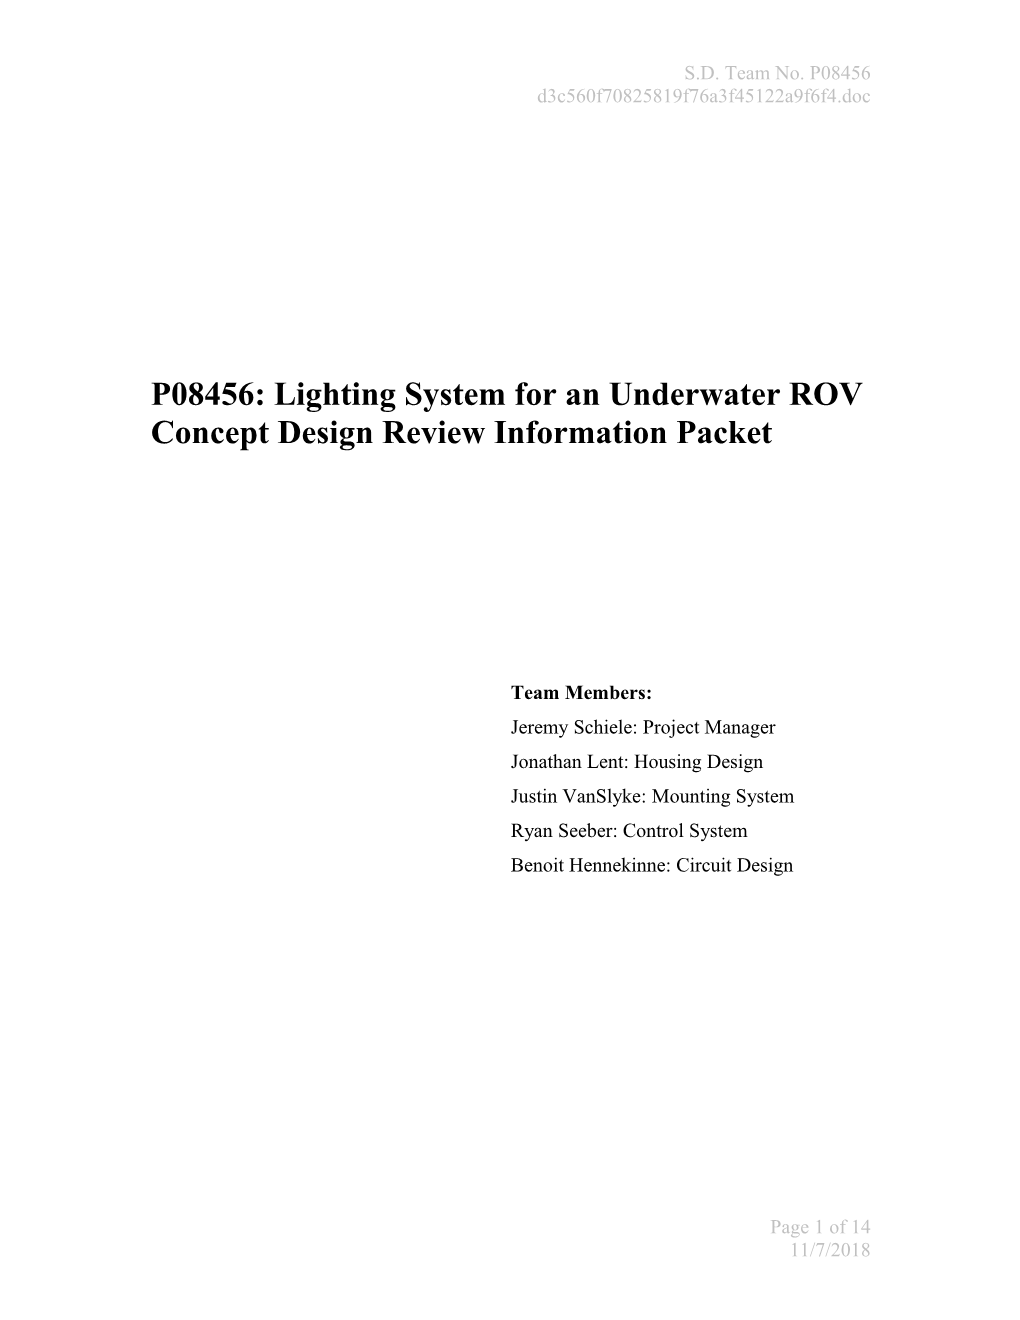 P06456: Lighting System for an Underwater ROV